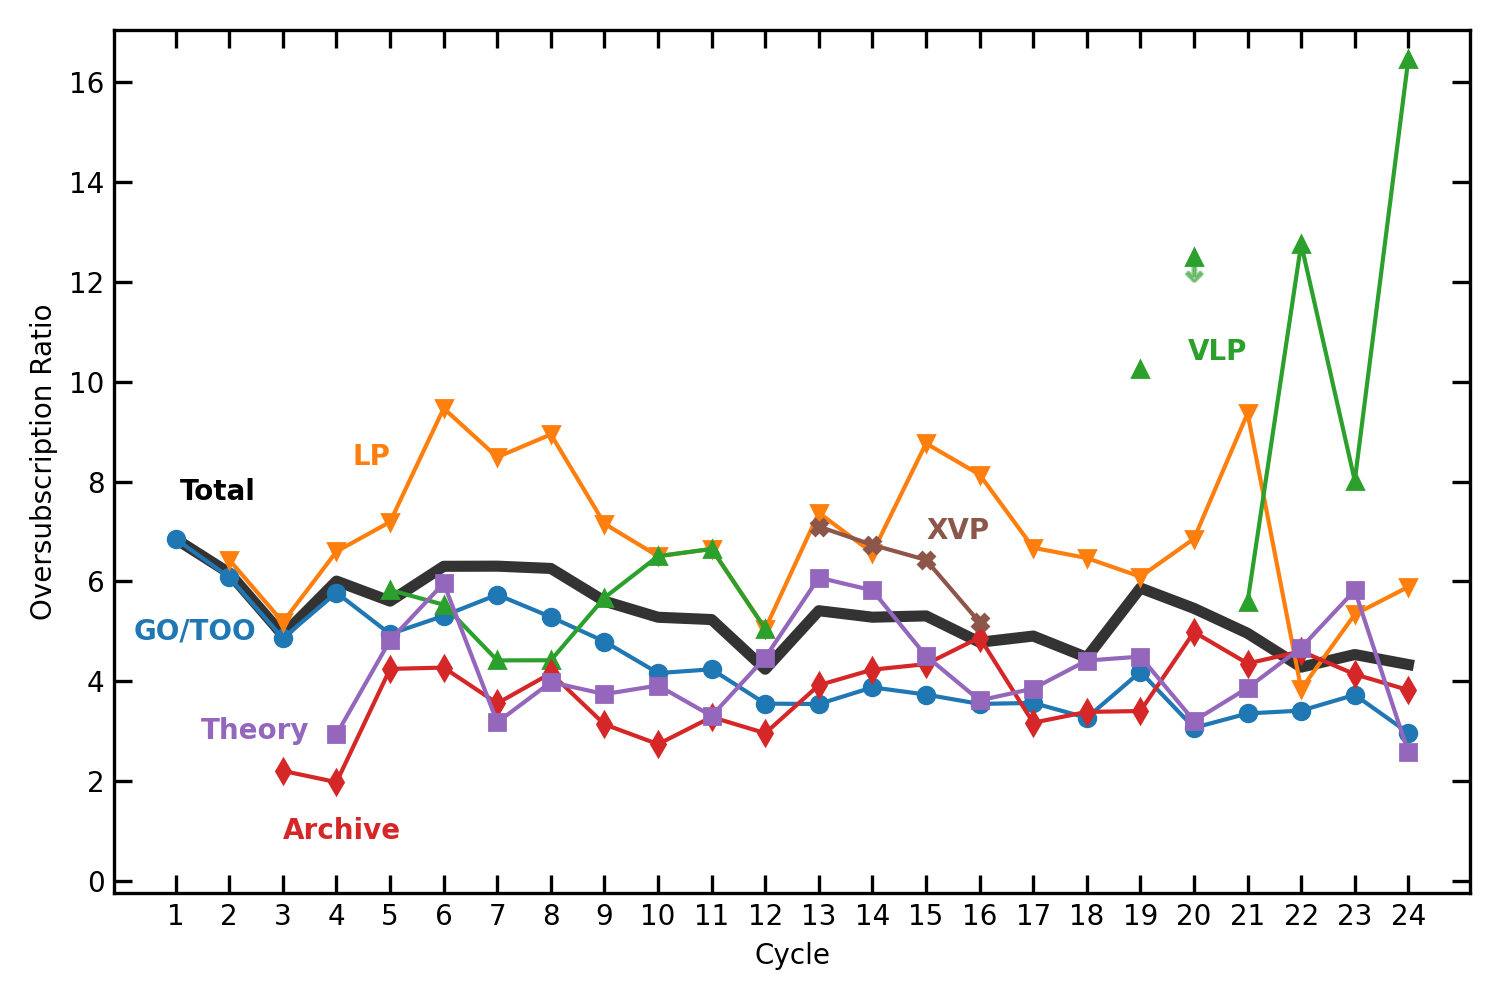 A line plot showing seven data trends. The X-Axis shows Chandra Proposal Cycle, from 1 to 24. TheY-Axis shows Oversubscription Ratio and stretches from 0 to just over 16. The seven data sets and their colors are GO/TOO in blue, Theory in purple, Archive in red, LP in orange, XVP in brown, VLP in green, and Total in a thicker black line. All are relatively constant, with LP and VLP showing the most extreme variability. The most recent VLP oversubscription is  over 16, a significant outlier from the other points, which are almost all between 3 and 8.